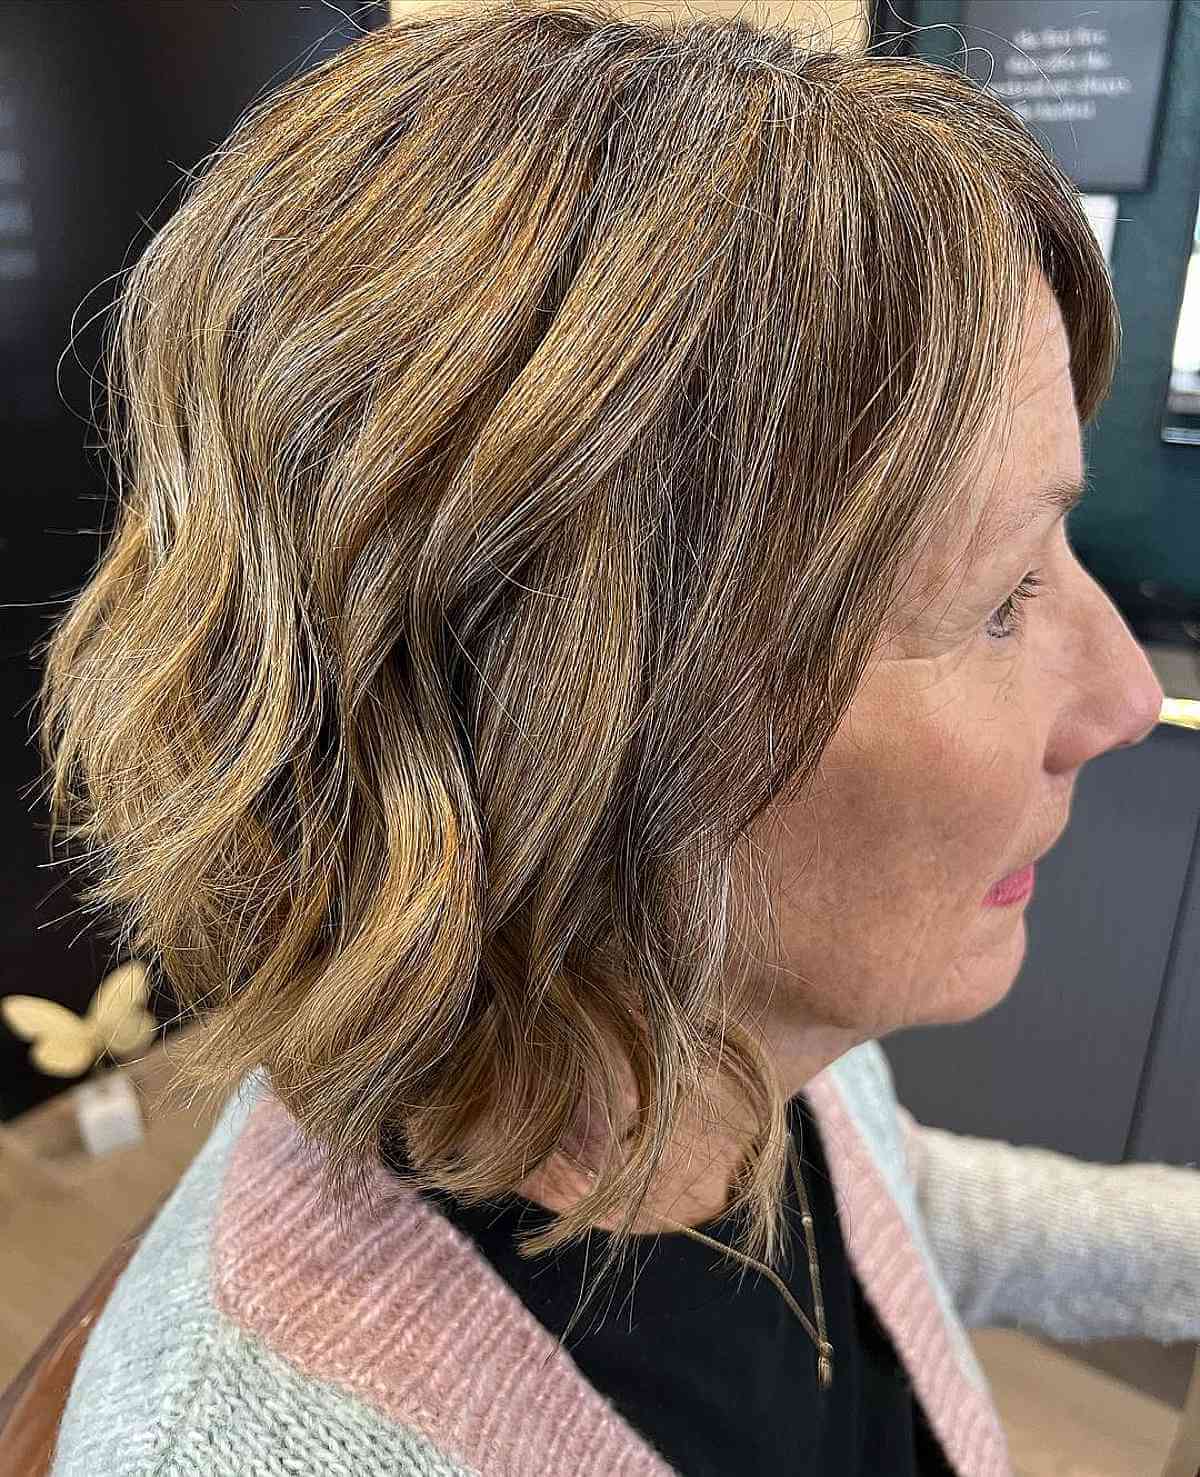 Neck-Length Wavy Bob Hairstyle for Women in Their 70s